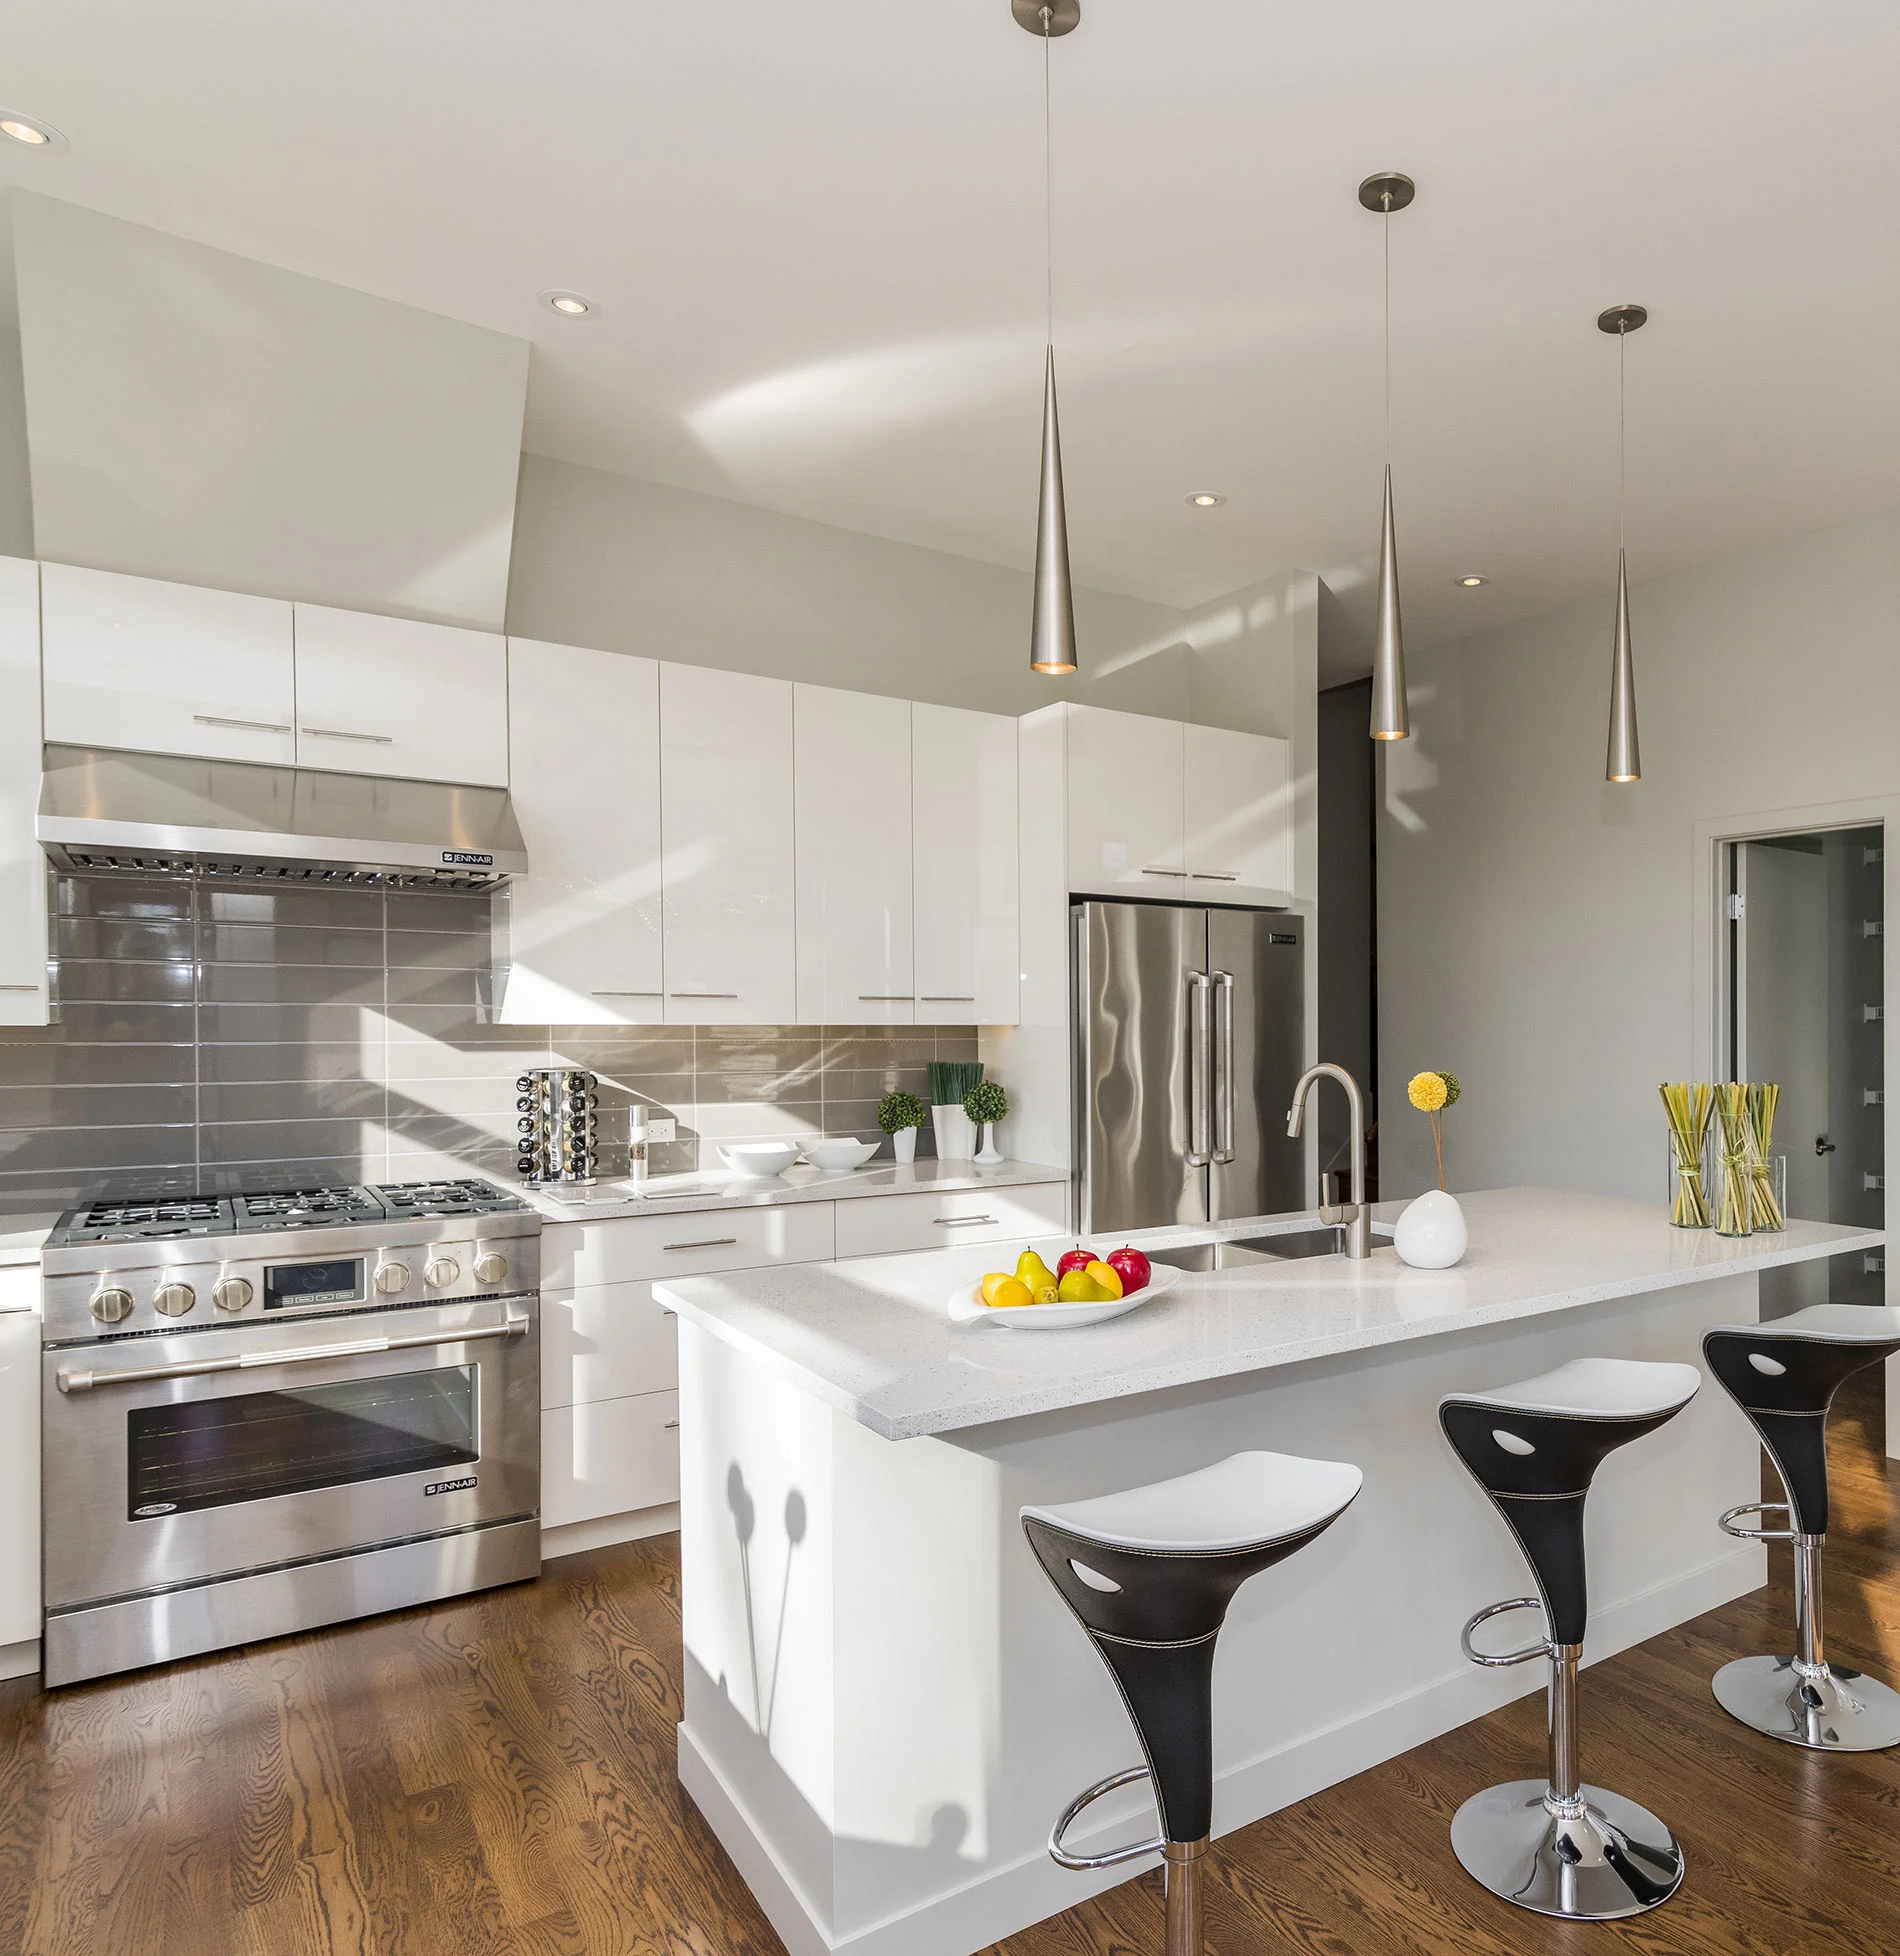 Modern kitchen with white cabinetry, stainless steel appliances, and a central island with bar stools in San Francisco.